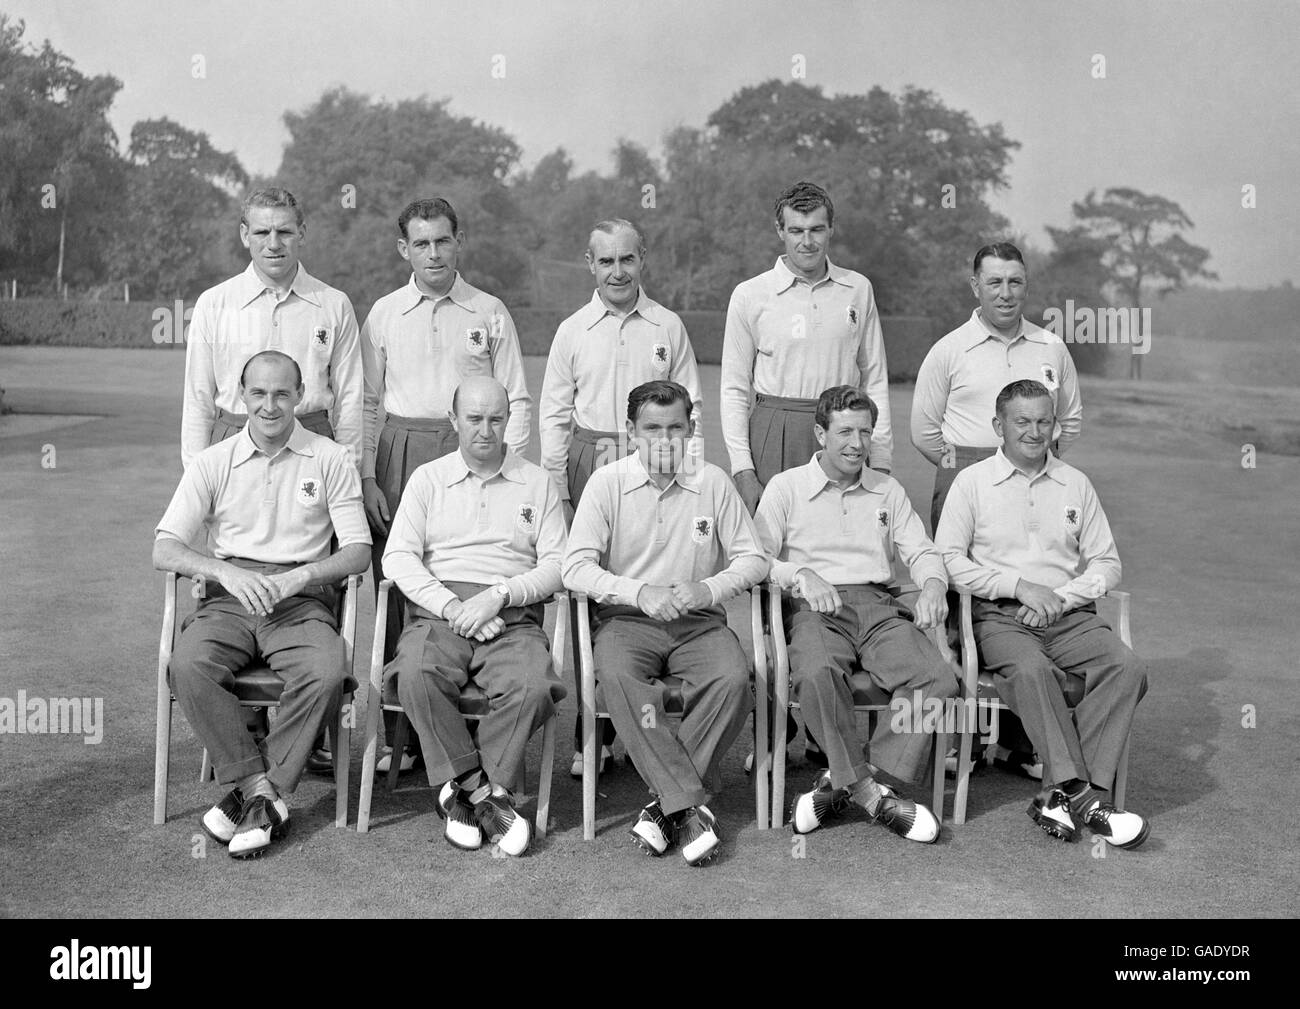 Golf - Ryder Cup - Great Britain team Stock Photo - Alamy